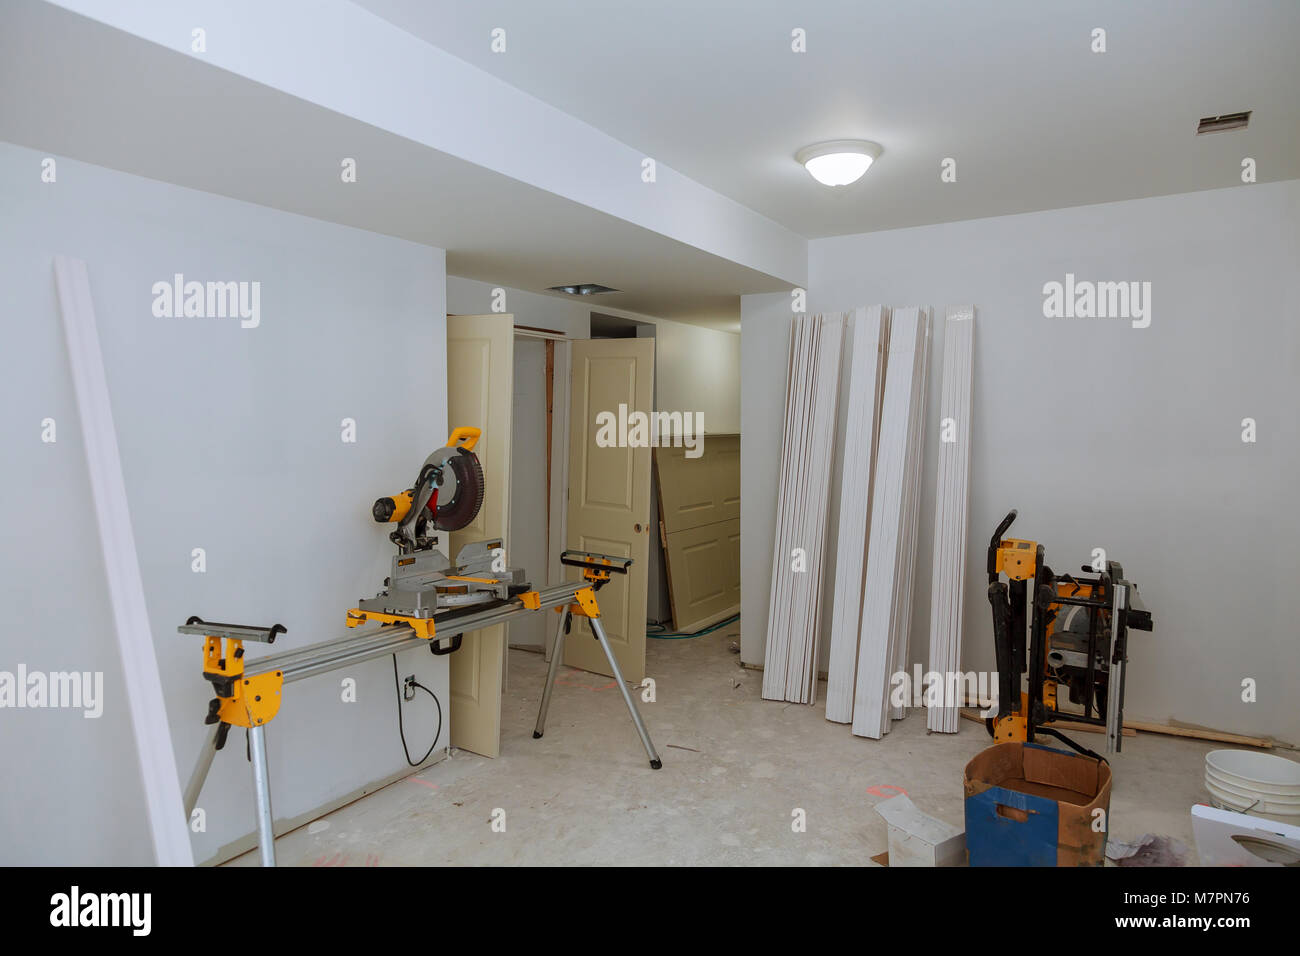 cutting wood on electric saw Interior construction of housing Construction building industry new home construction interior drywall tape. Building con Stock Photo